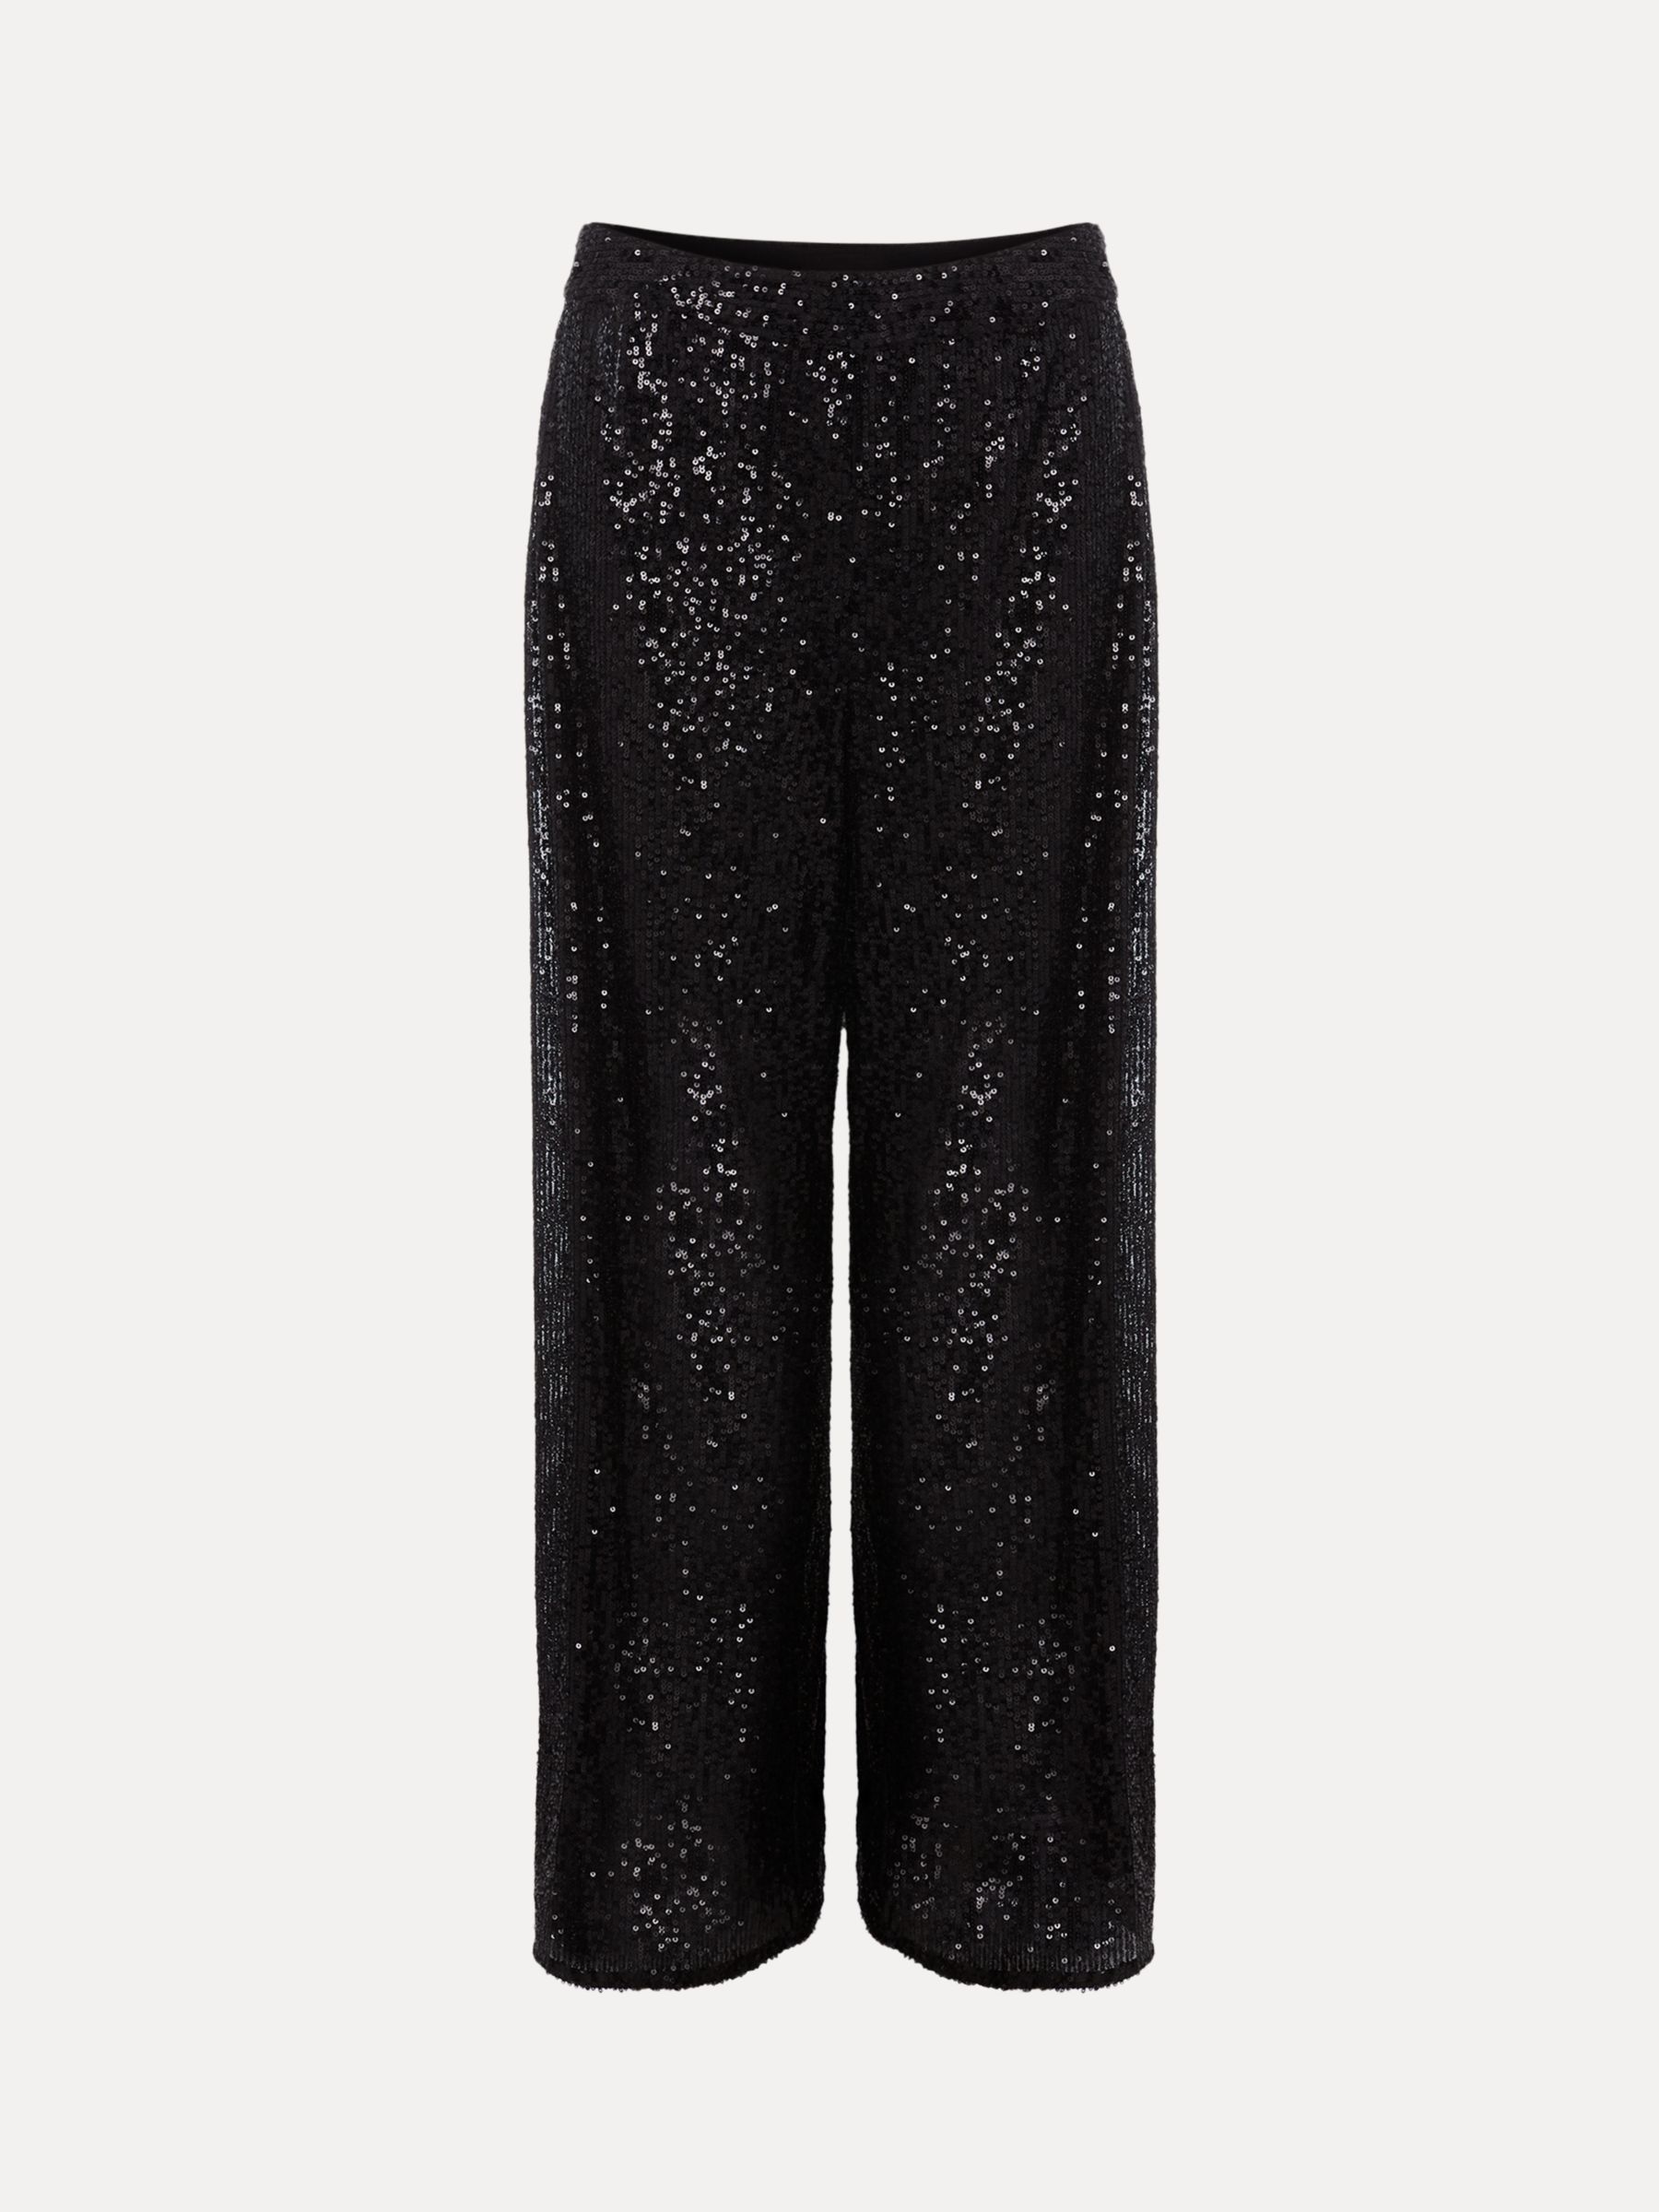 Buy Phase Eight Florentine Sequin Wide Leg Trousers, Black Online at johnlewis.com